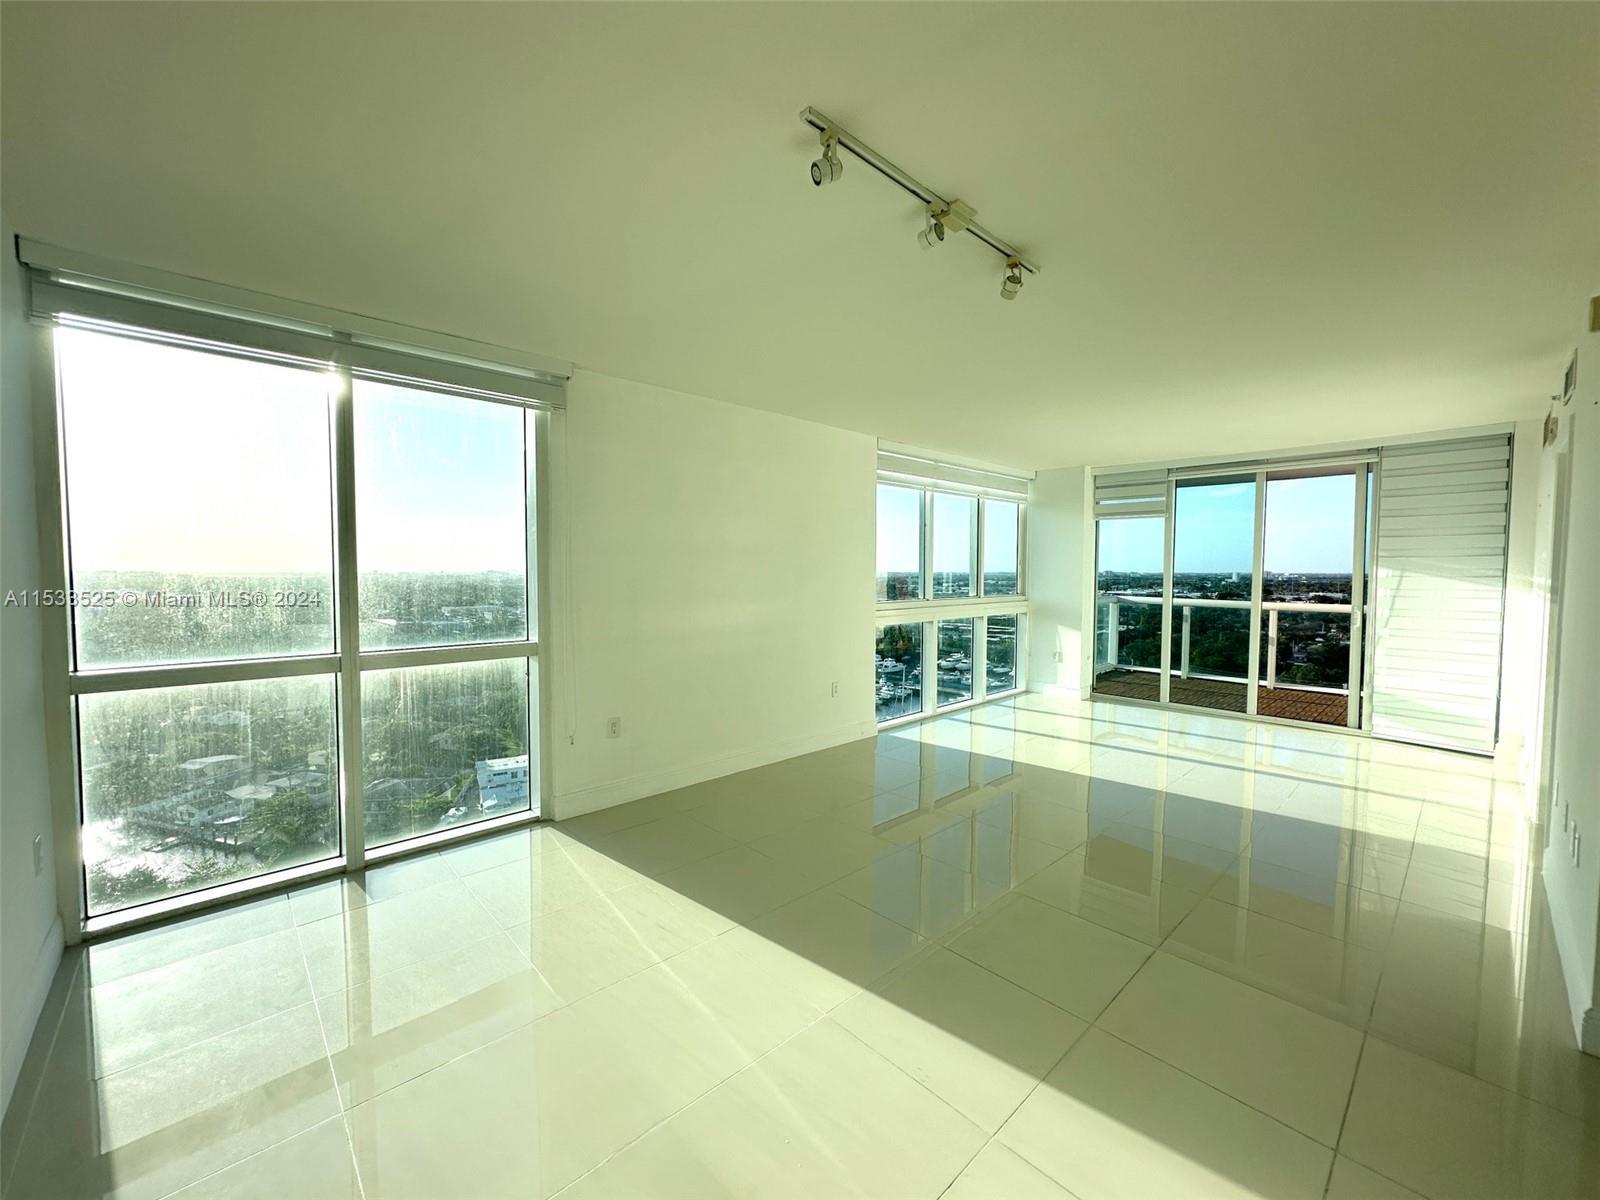 Photo of 1861 NW S River Dr #1805 in Miami, FL